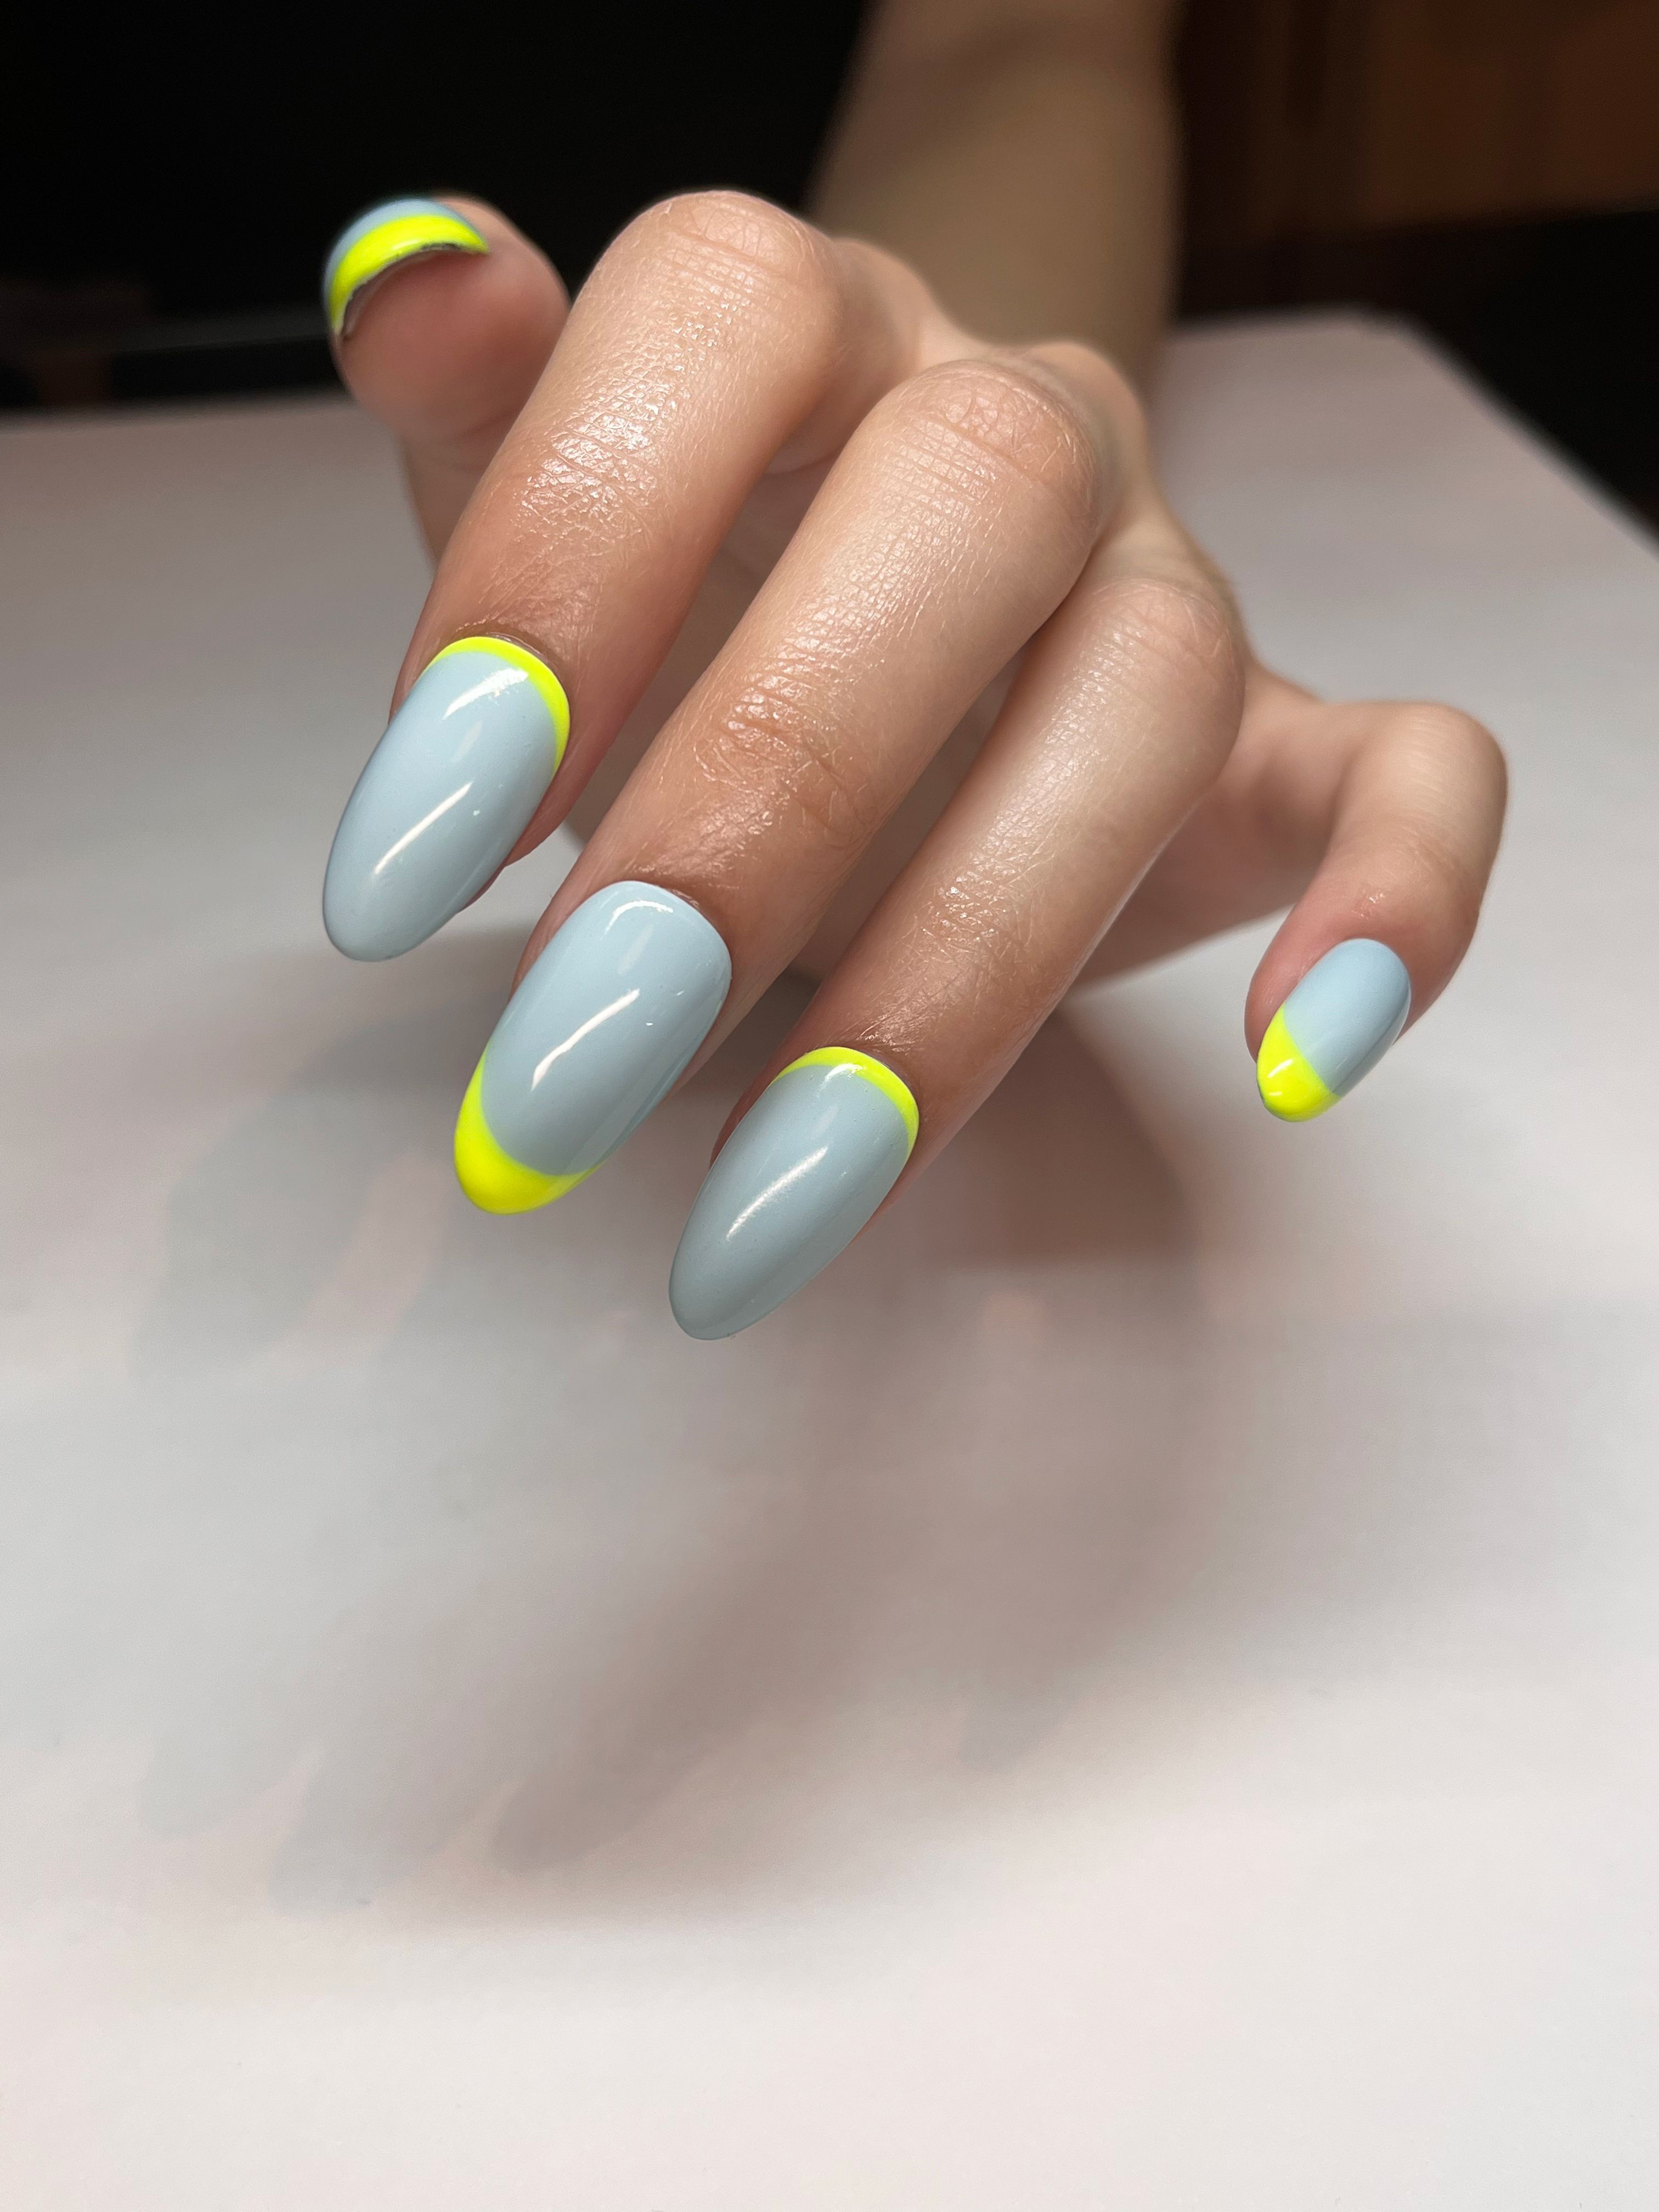 20 Fancy French Nails Ideas You Should Try This Season!